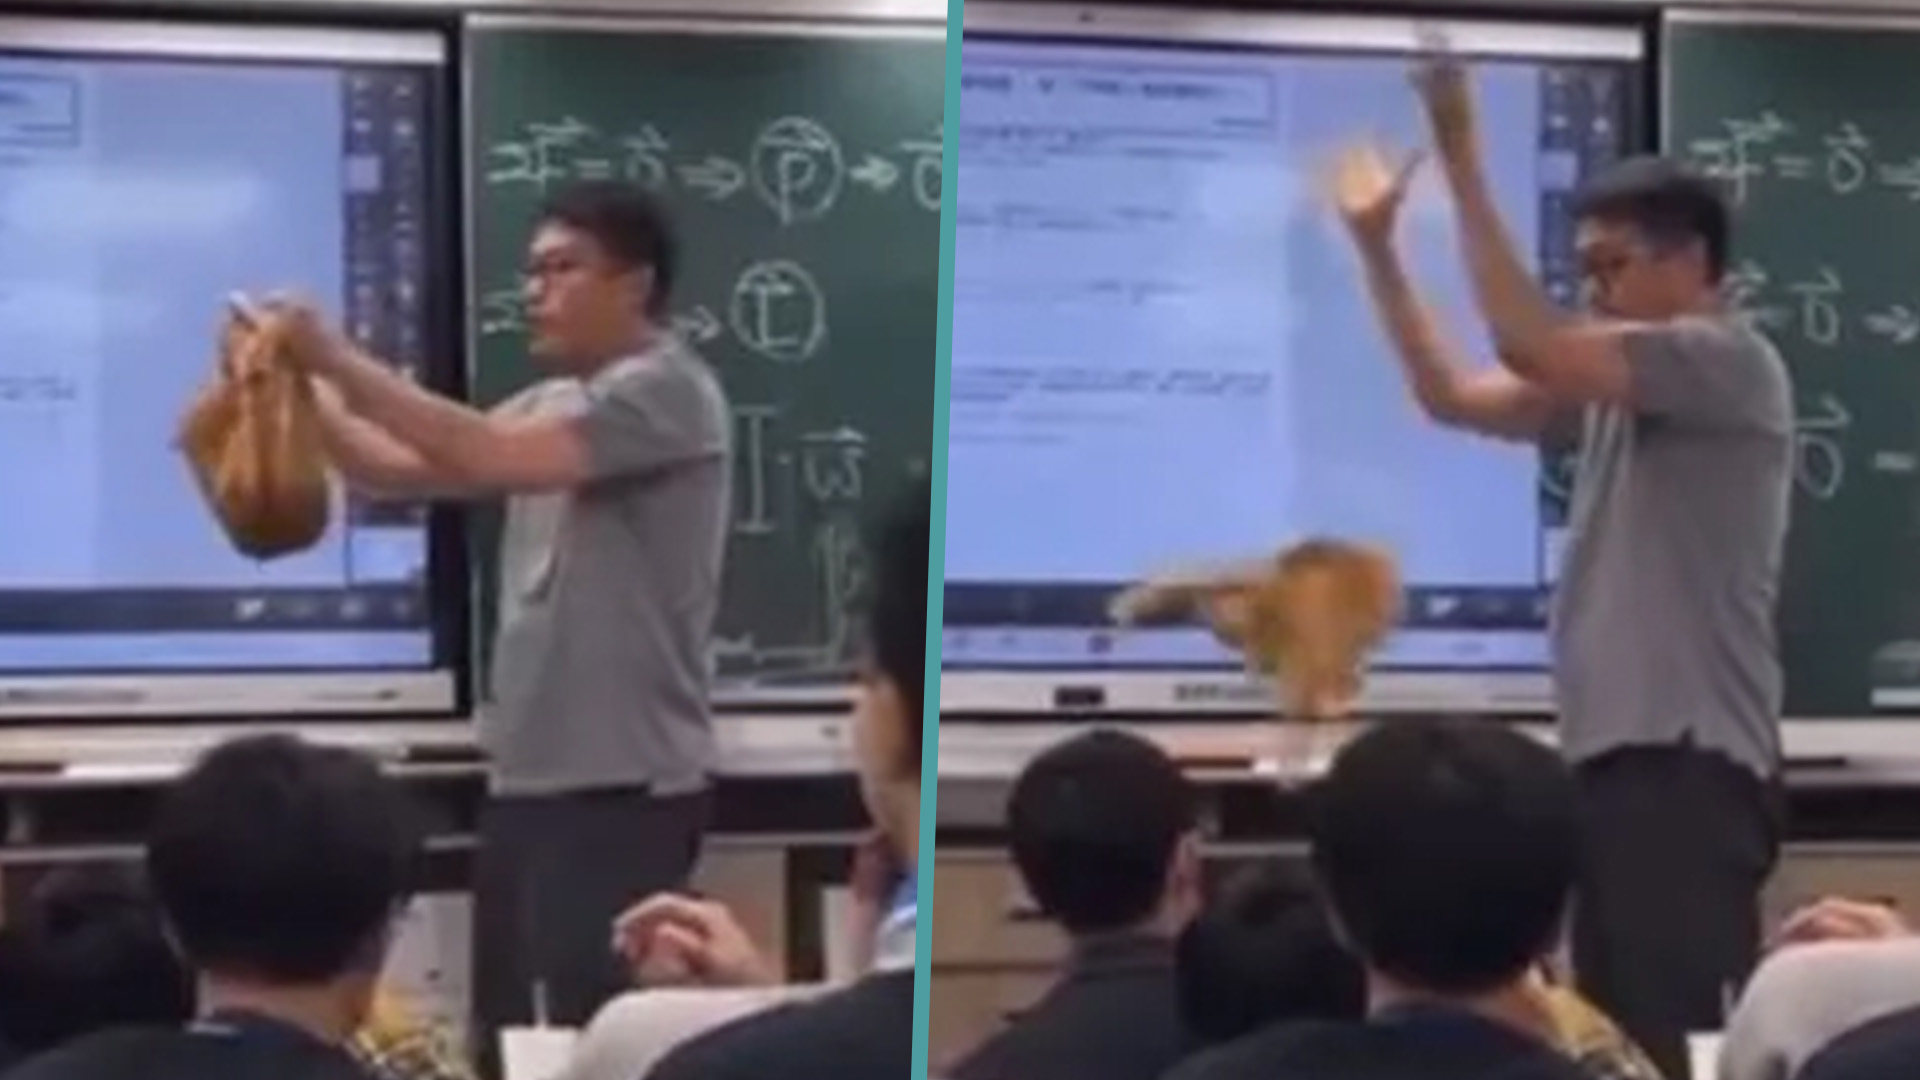 A science teacher in Taiwan has been forced to apologise after he dropped a squealing cat onto a classroom floor as part of an experiment, sparking an angry backlash on social media. Photo: SCMP composite/Facebook